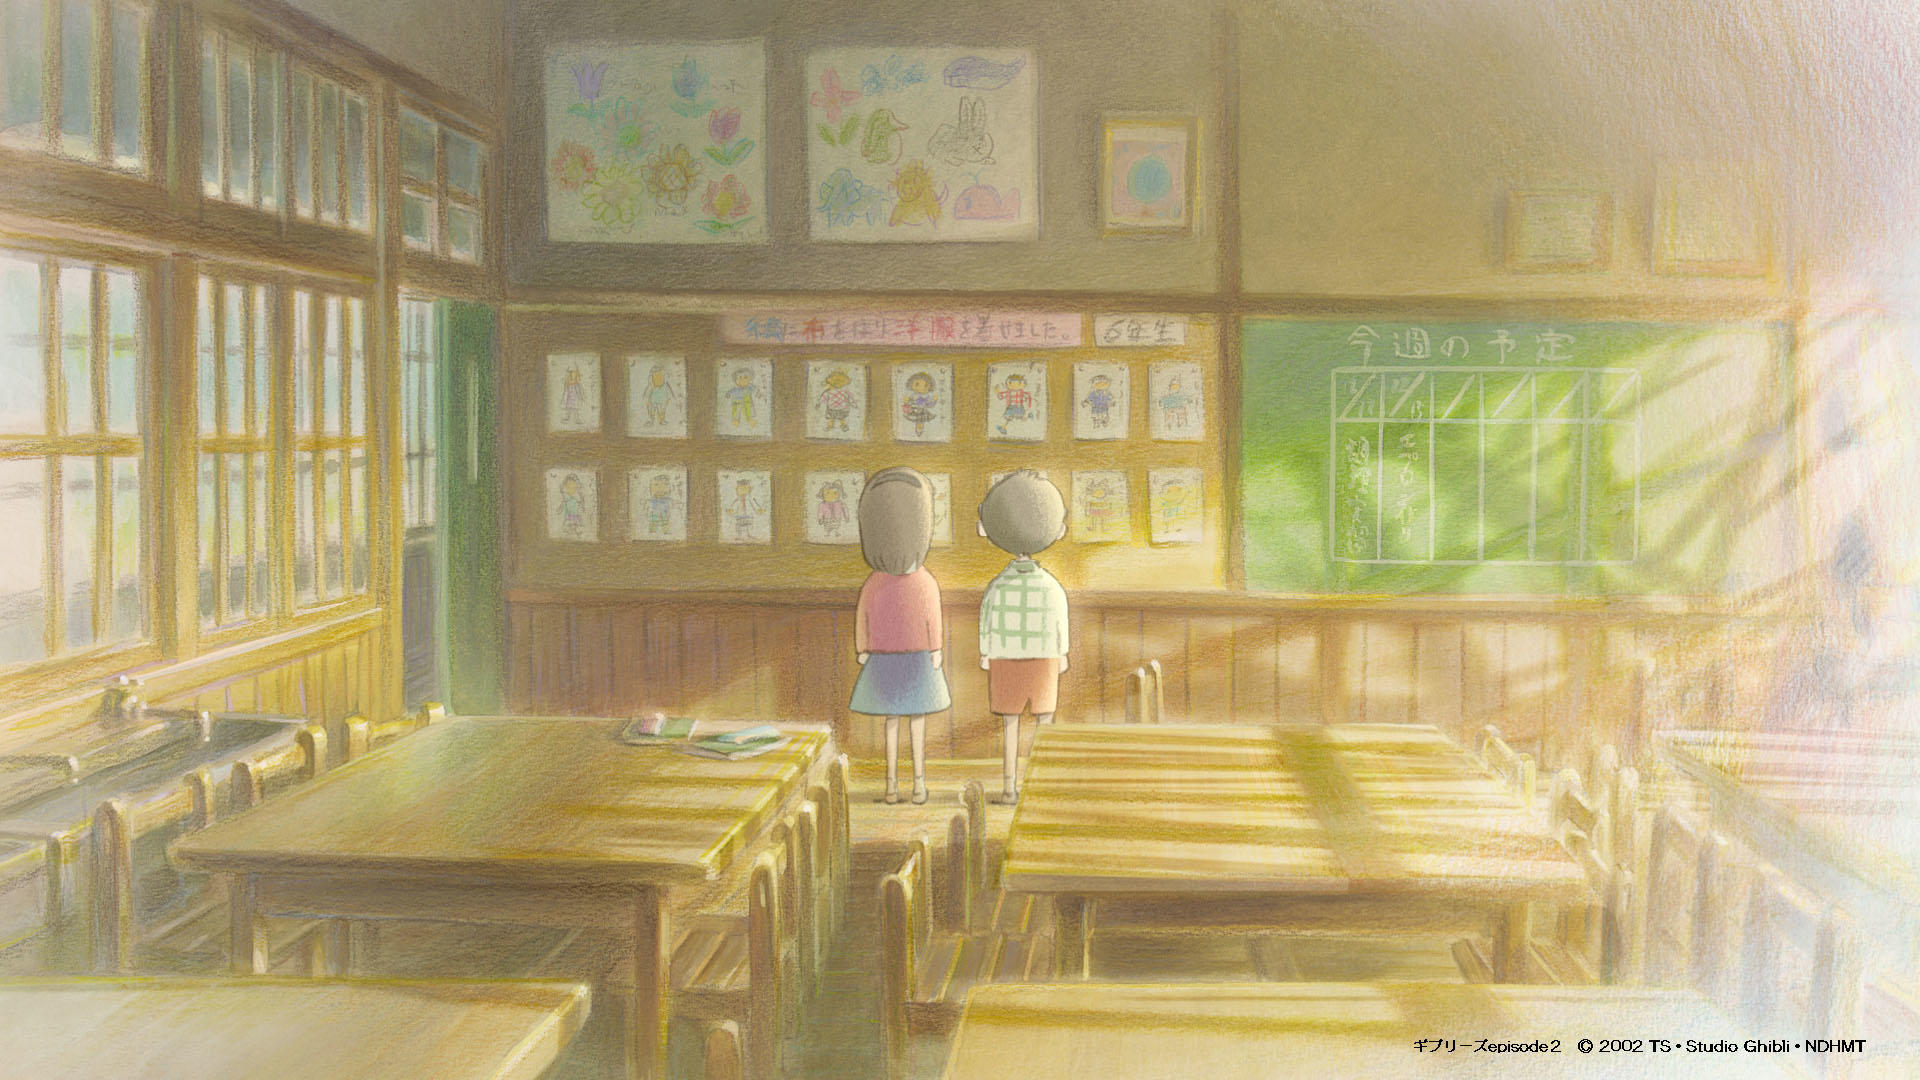 Studio Ghibli Releases More New Video Call Backgrounds For Free